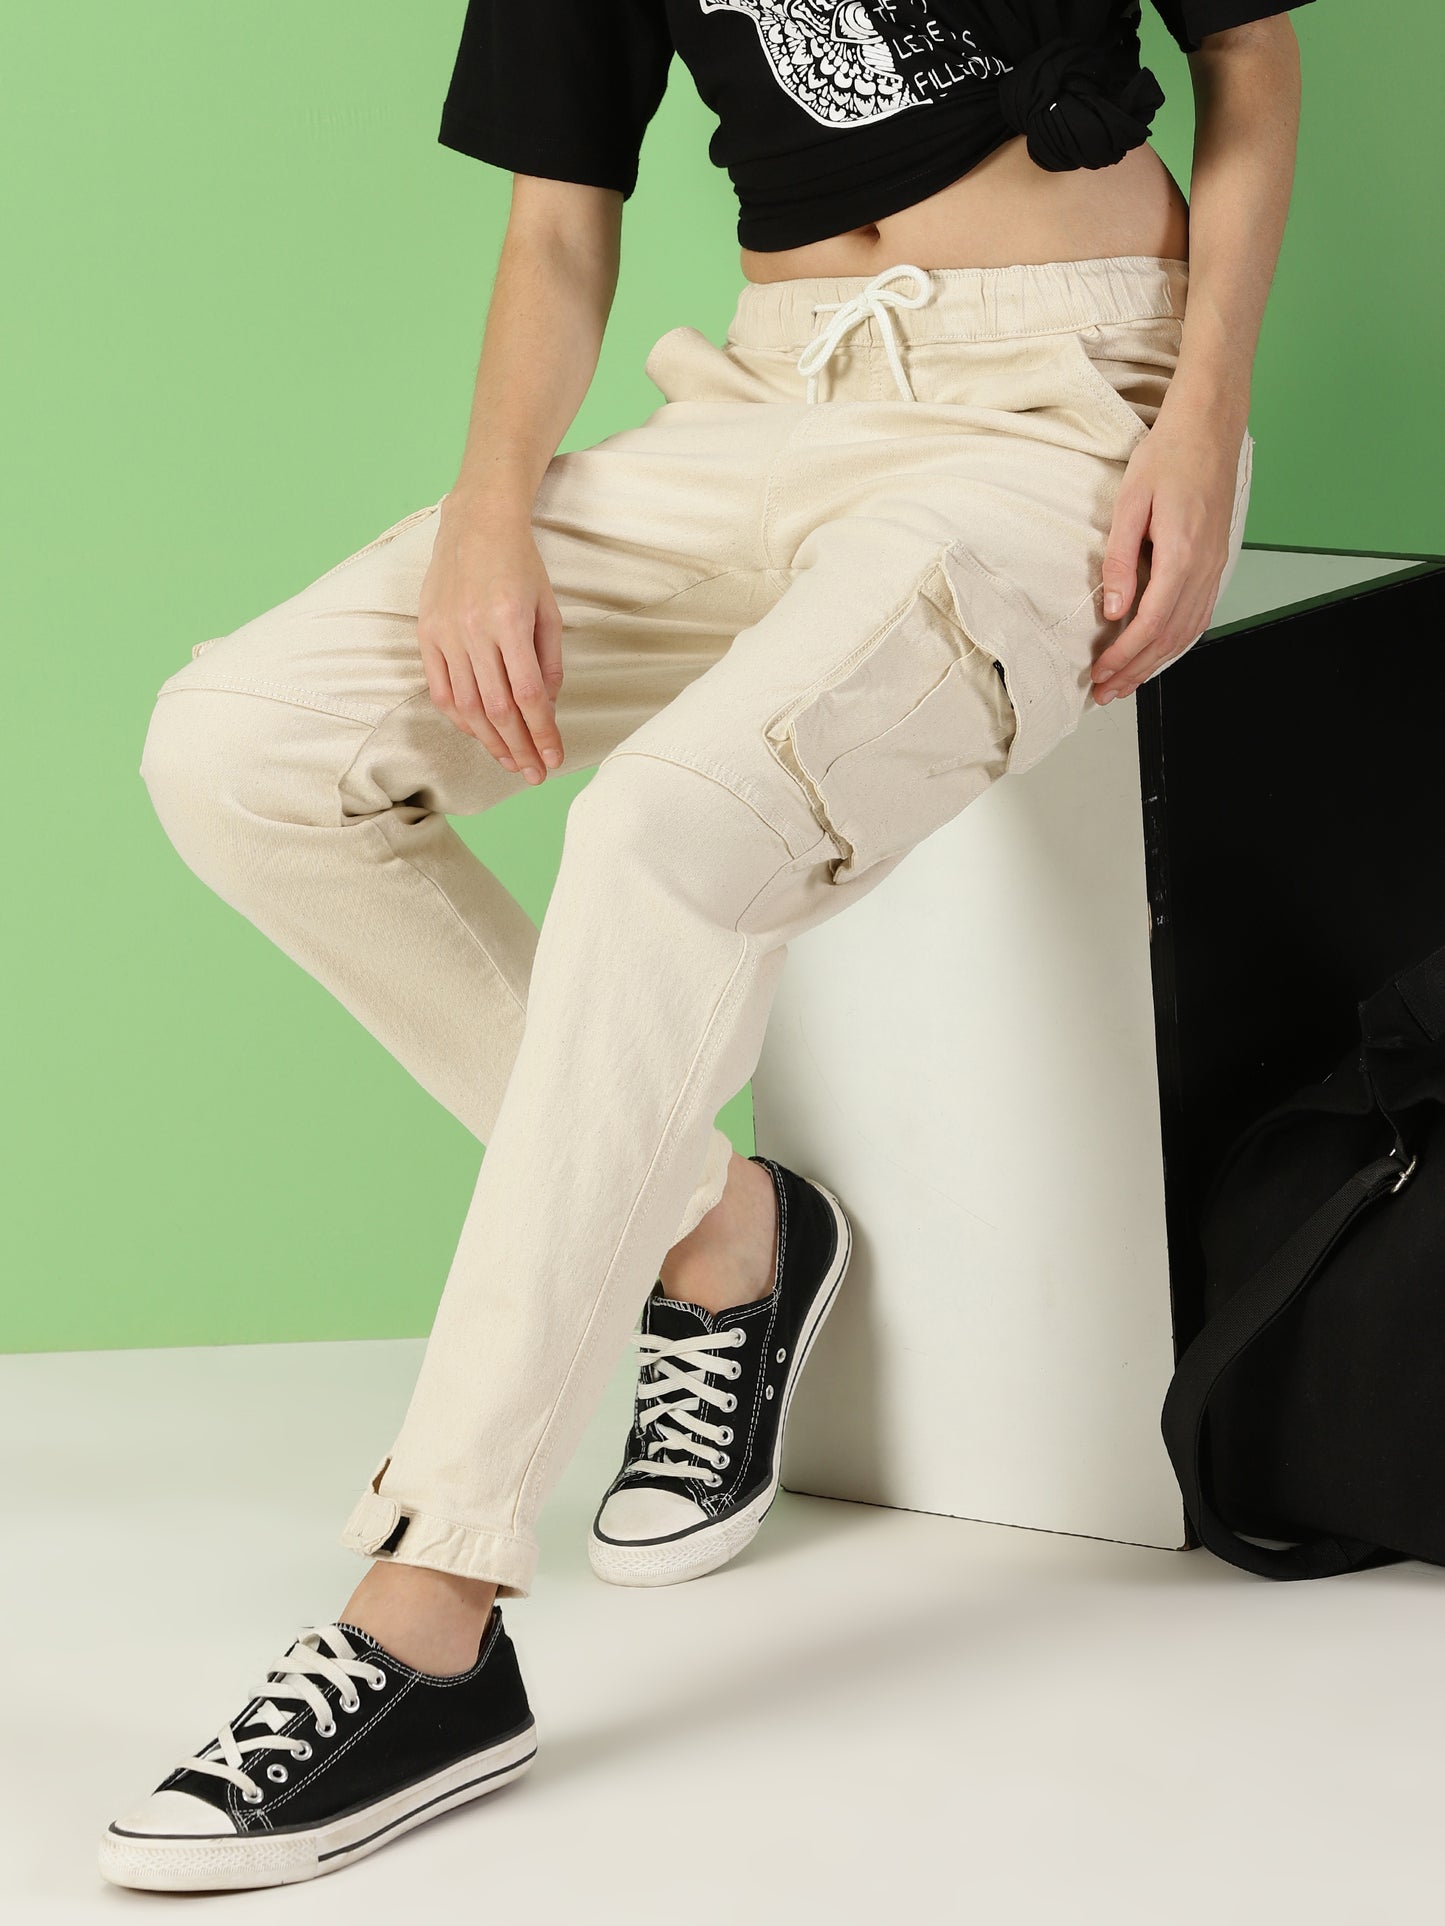 THIRD QUADRANT women jeans feature a hip hop-inspired design with cargo pockets that add a touch of utility and style.